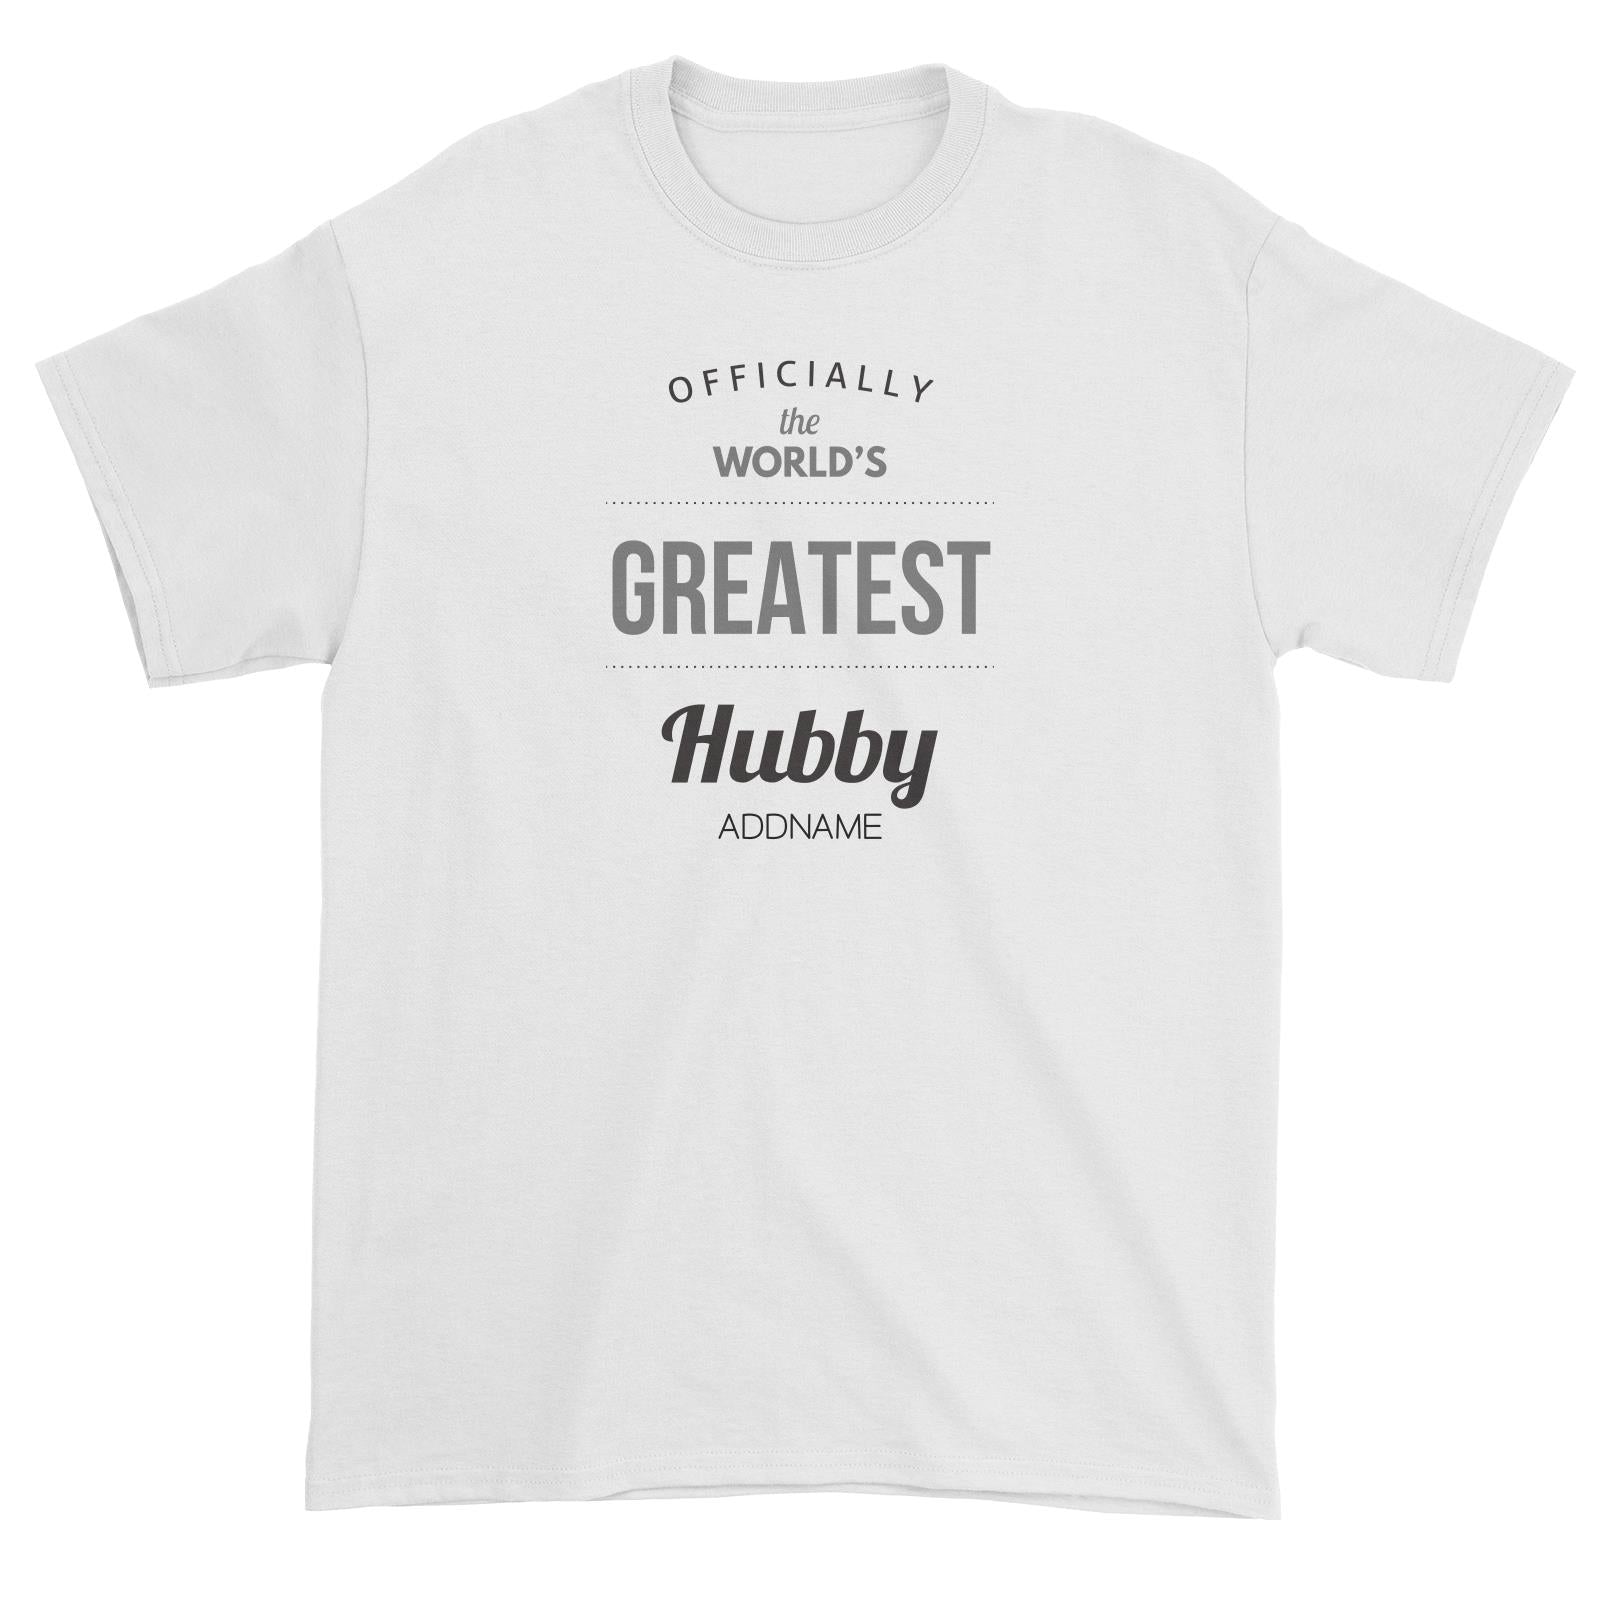 Husband and Wife Officially The World's Geatest Hubby Addname Unisex T-Shirt